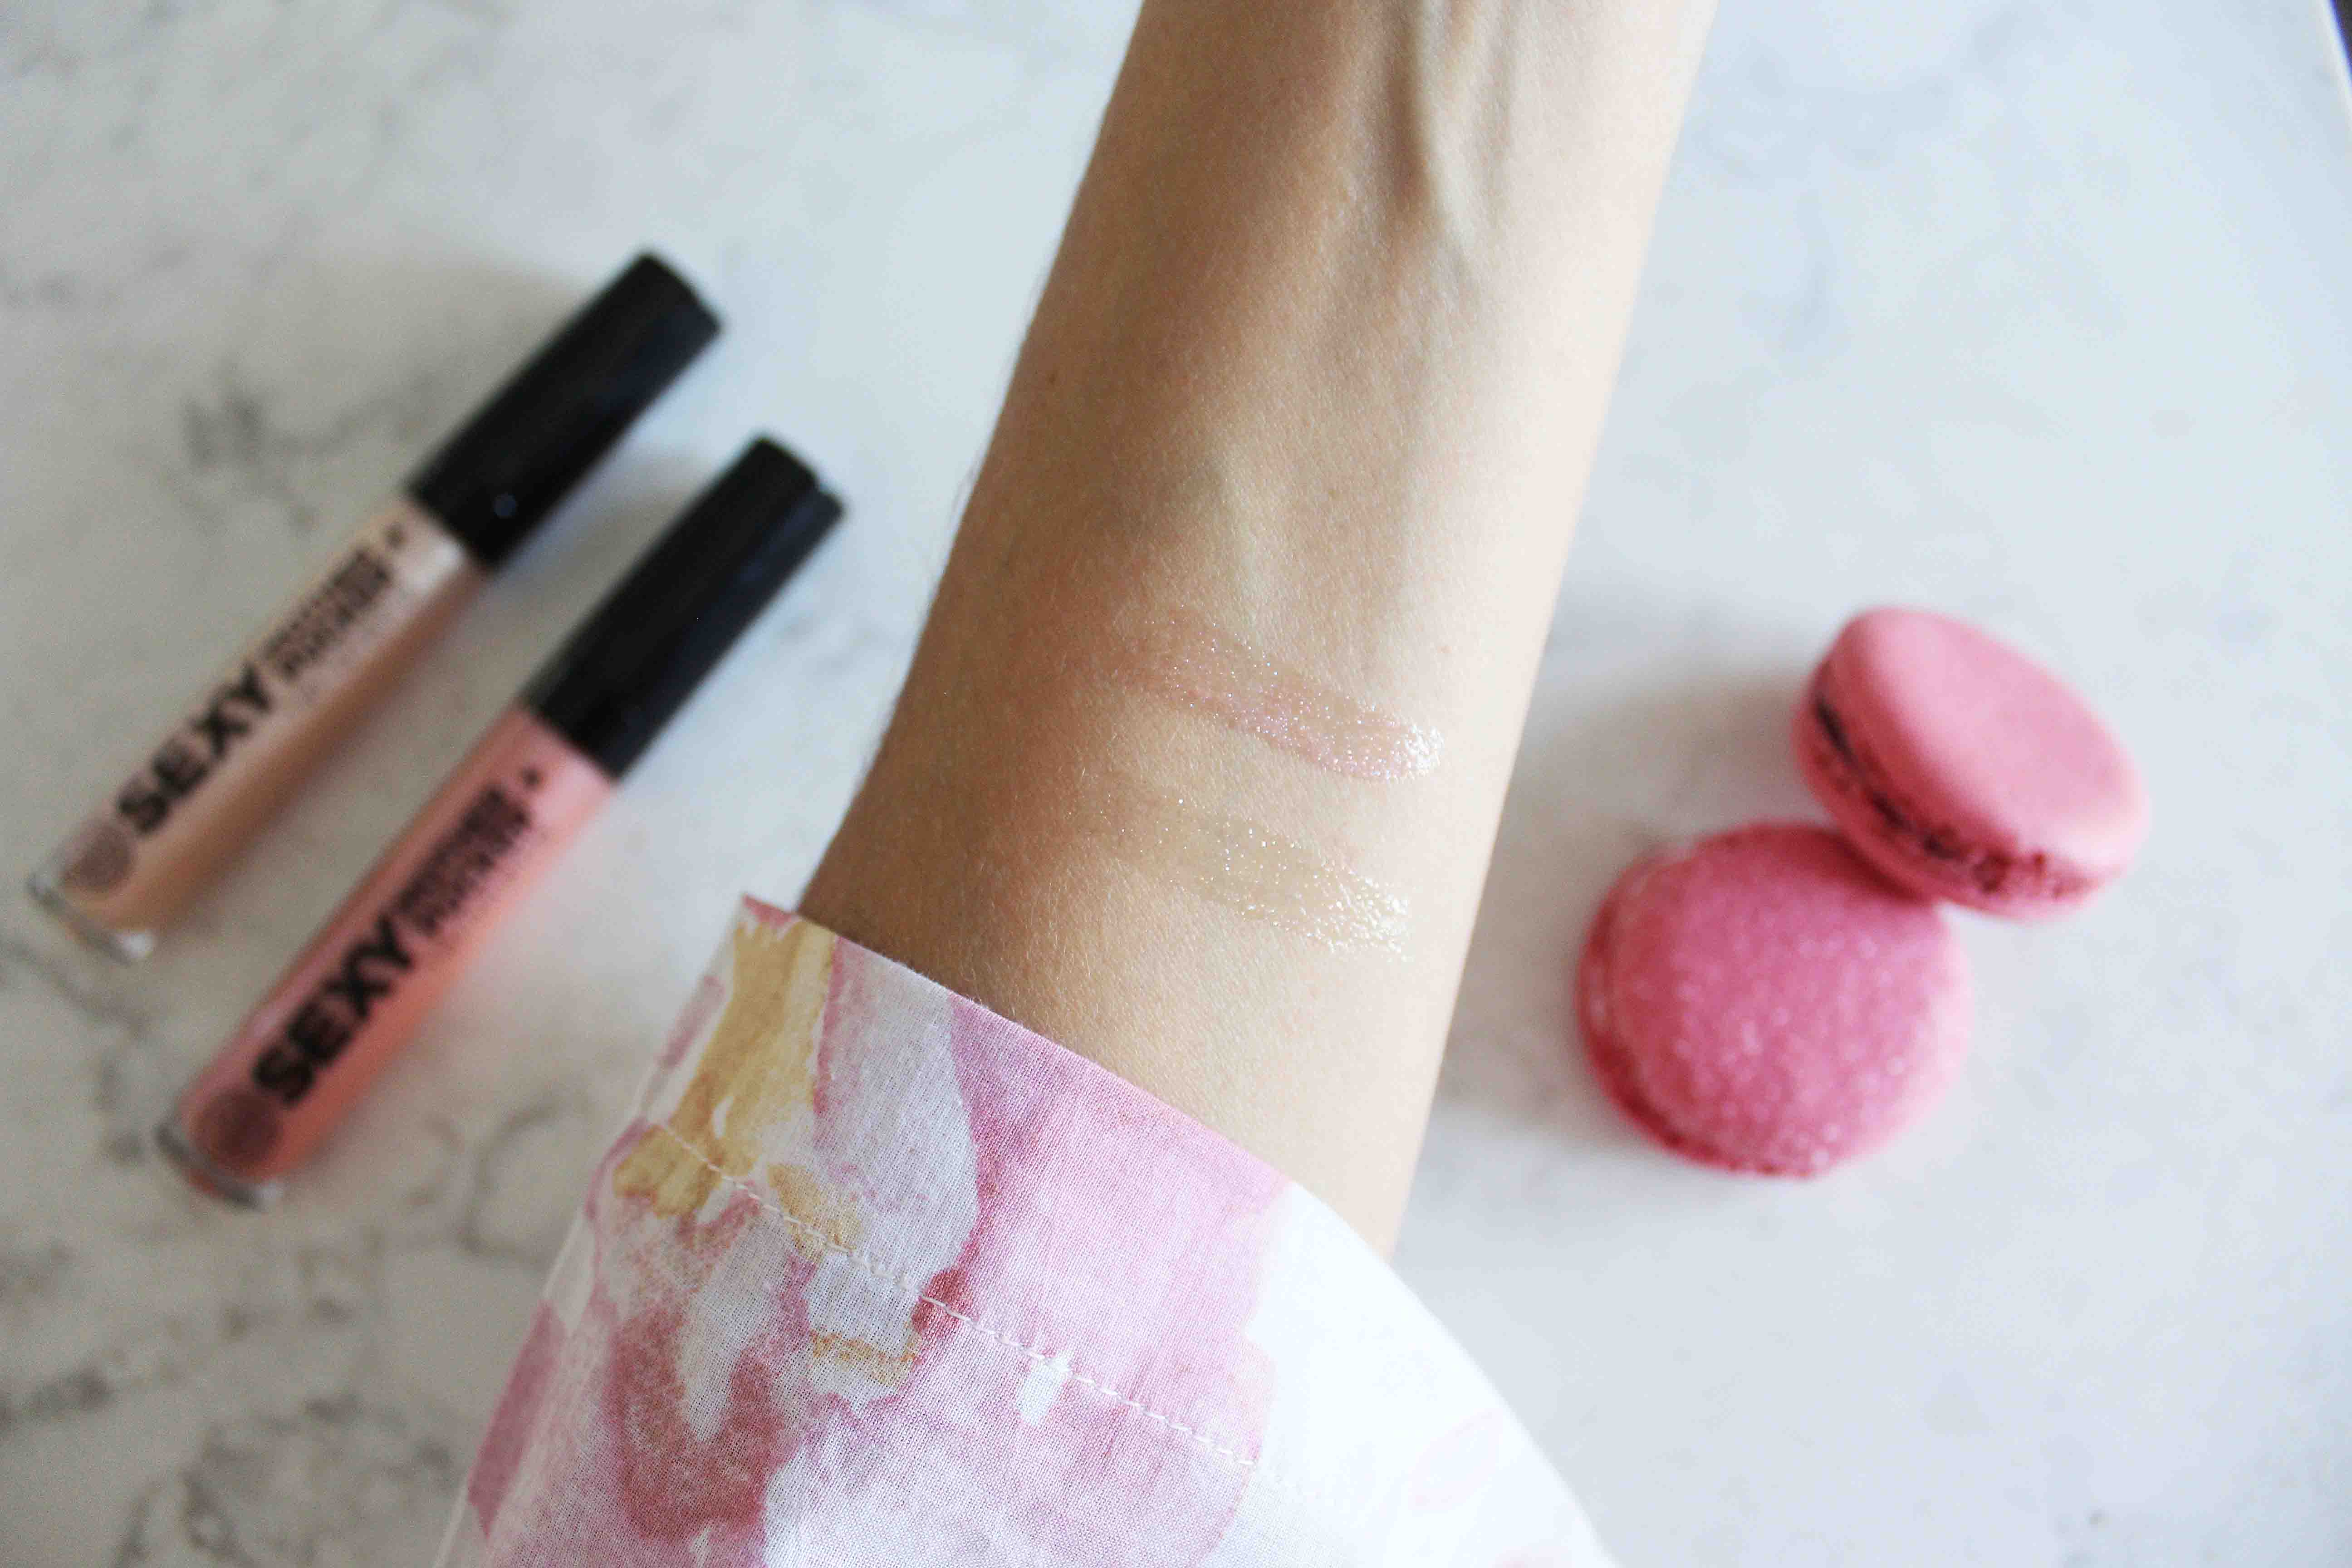 Soap & Glory Review